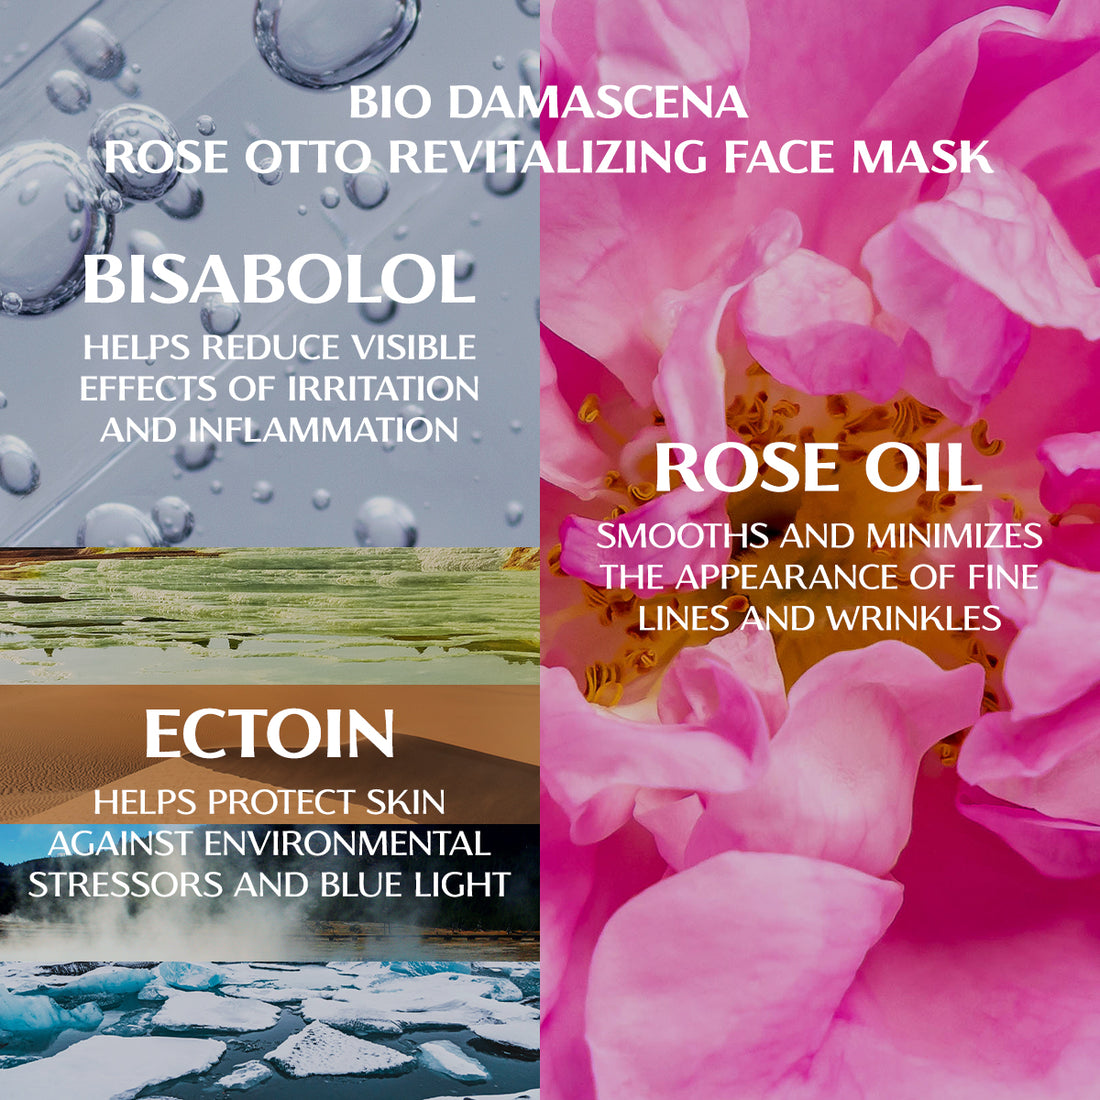 A collage highlighting the benefits of various skincare ingredients, including BIO DAMASCENA ROSE OTTO REVITALIZING FACE MASK, bisabolol, rose oil, and ectoin for hydration, inflammation reduction, smoothing lines, and protection against environmental stress.